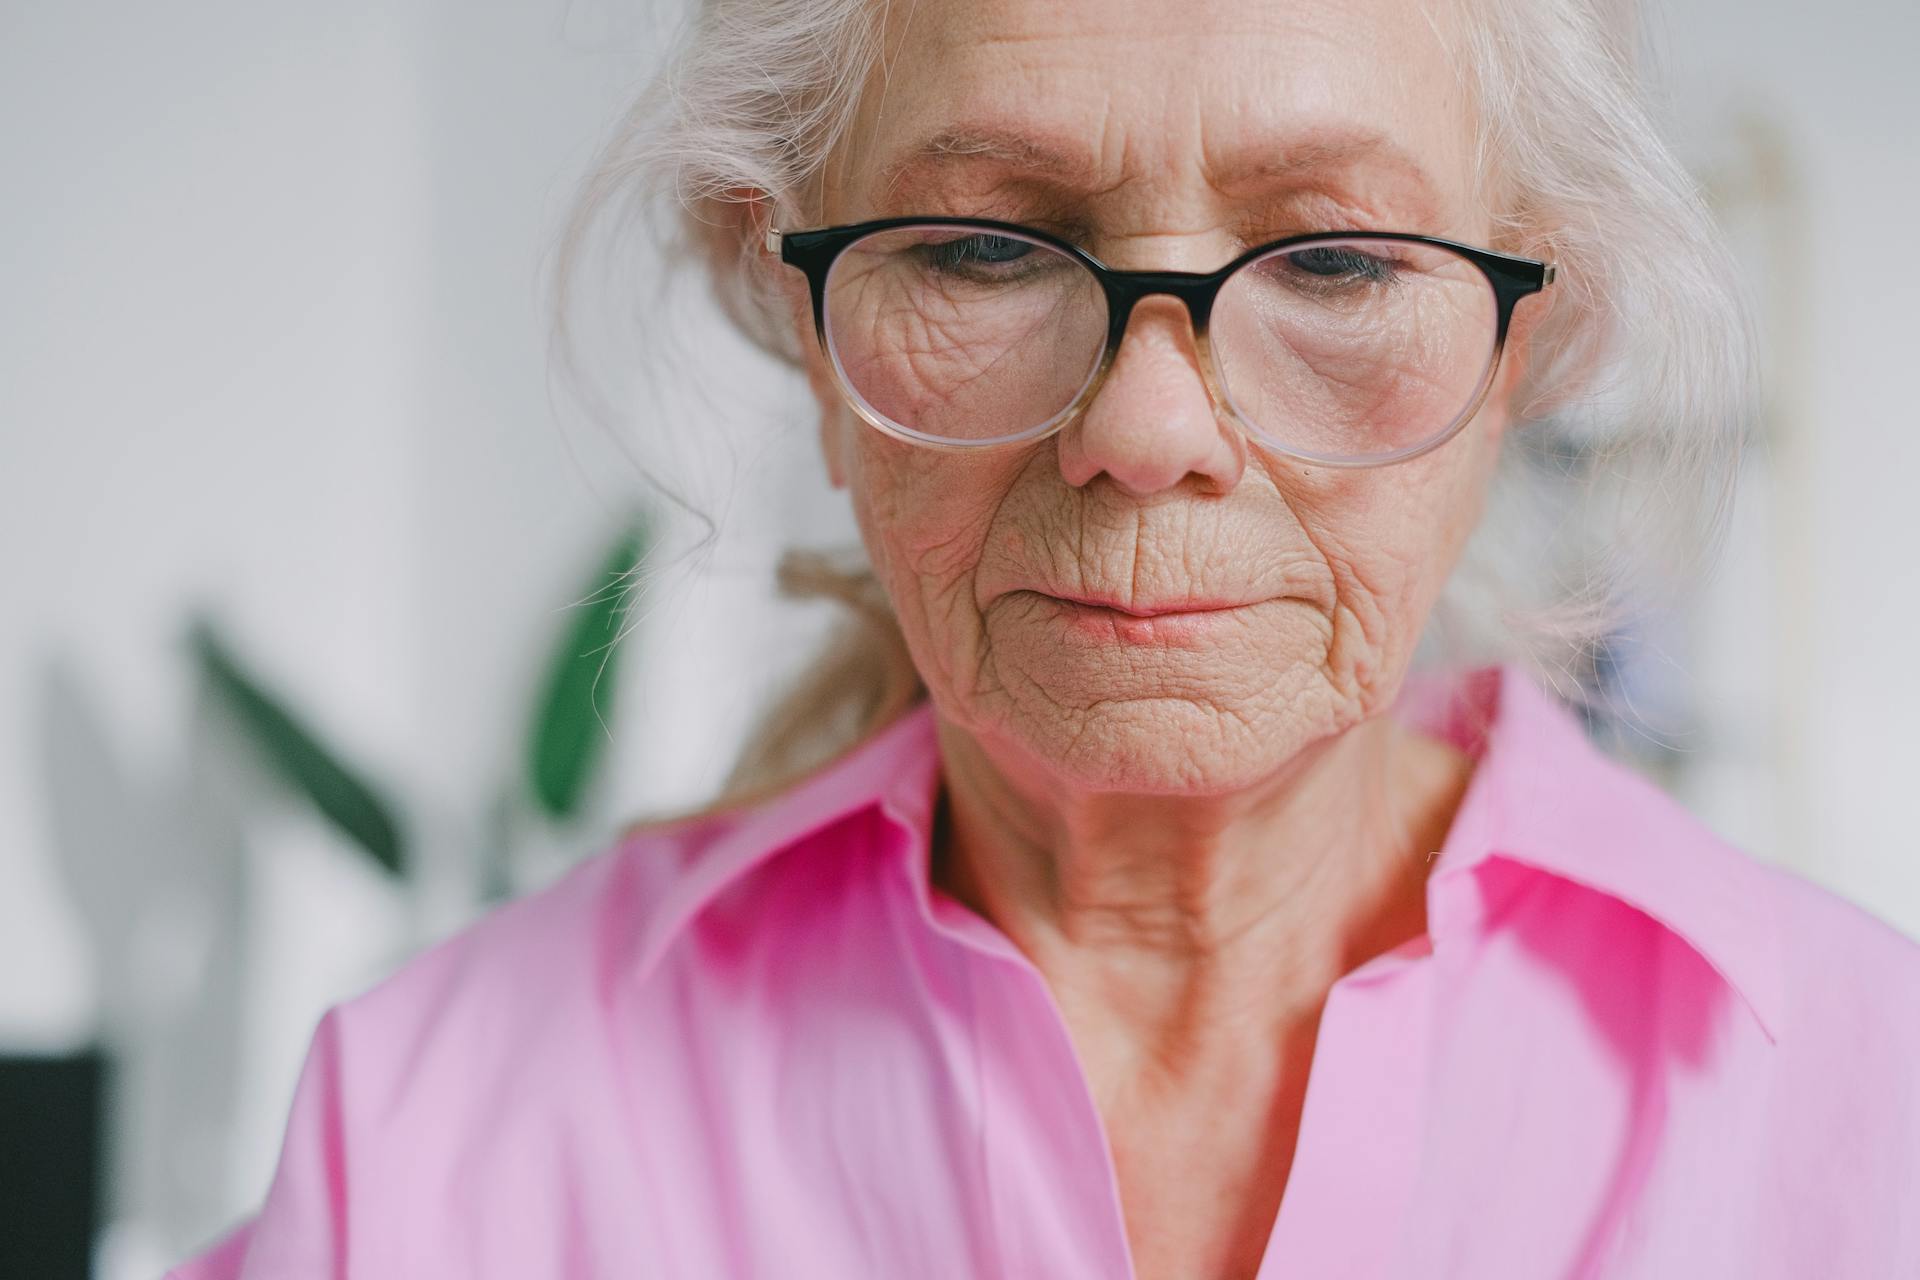 An old woman looking down | Source: Pexels